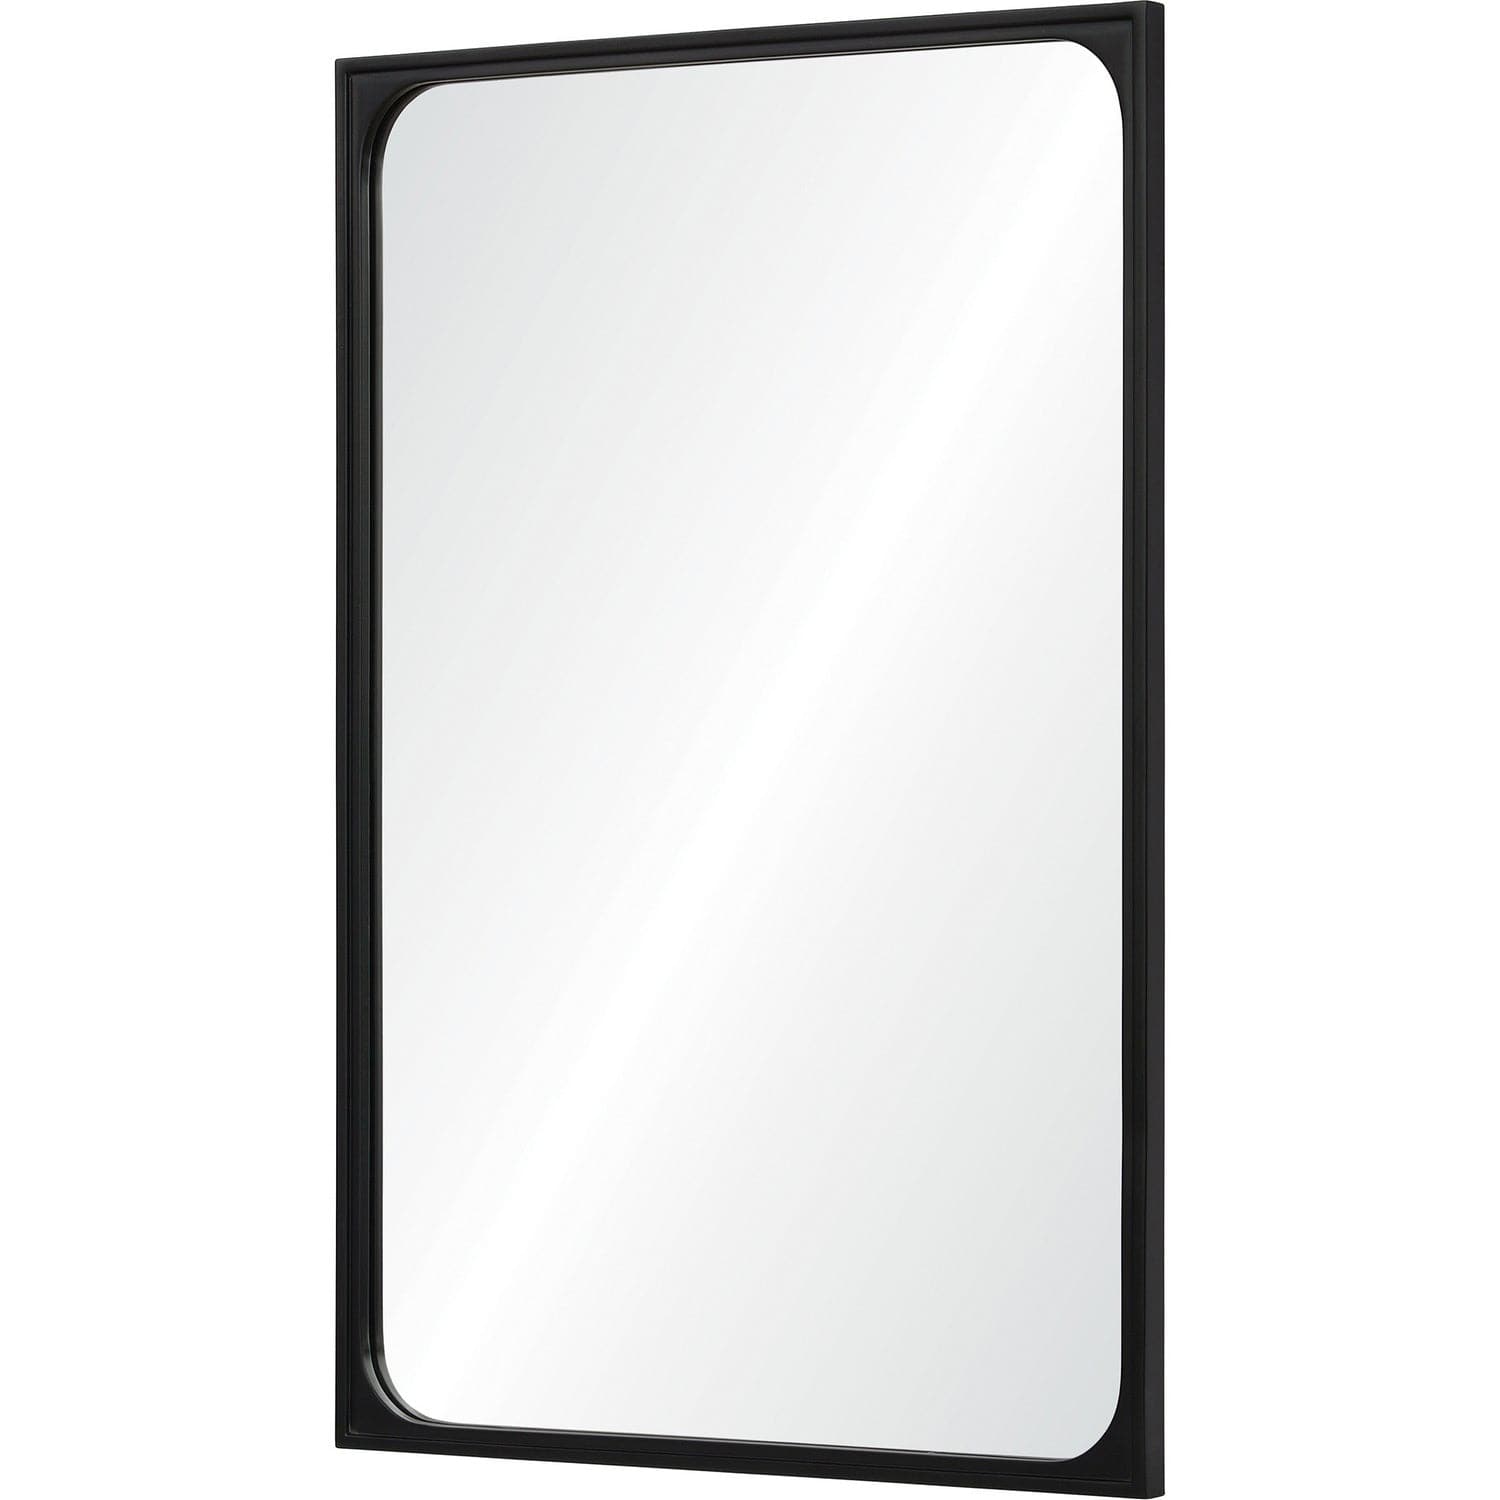 Renwil - MT2151 - Mirrors/Pictures - Mirrors-Rect./Sq.